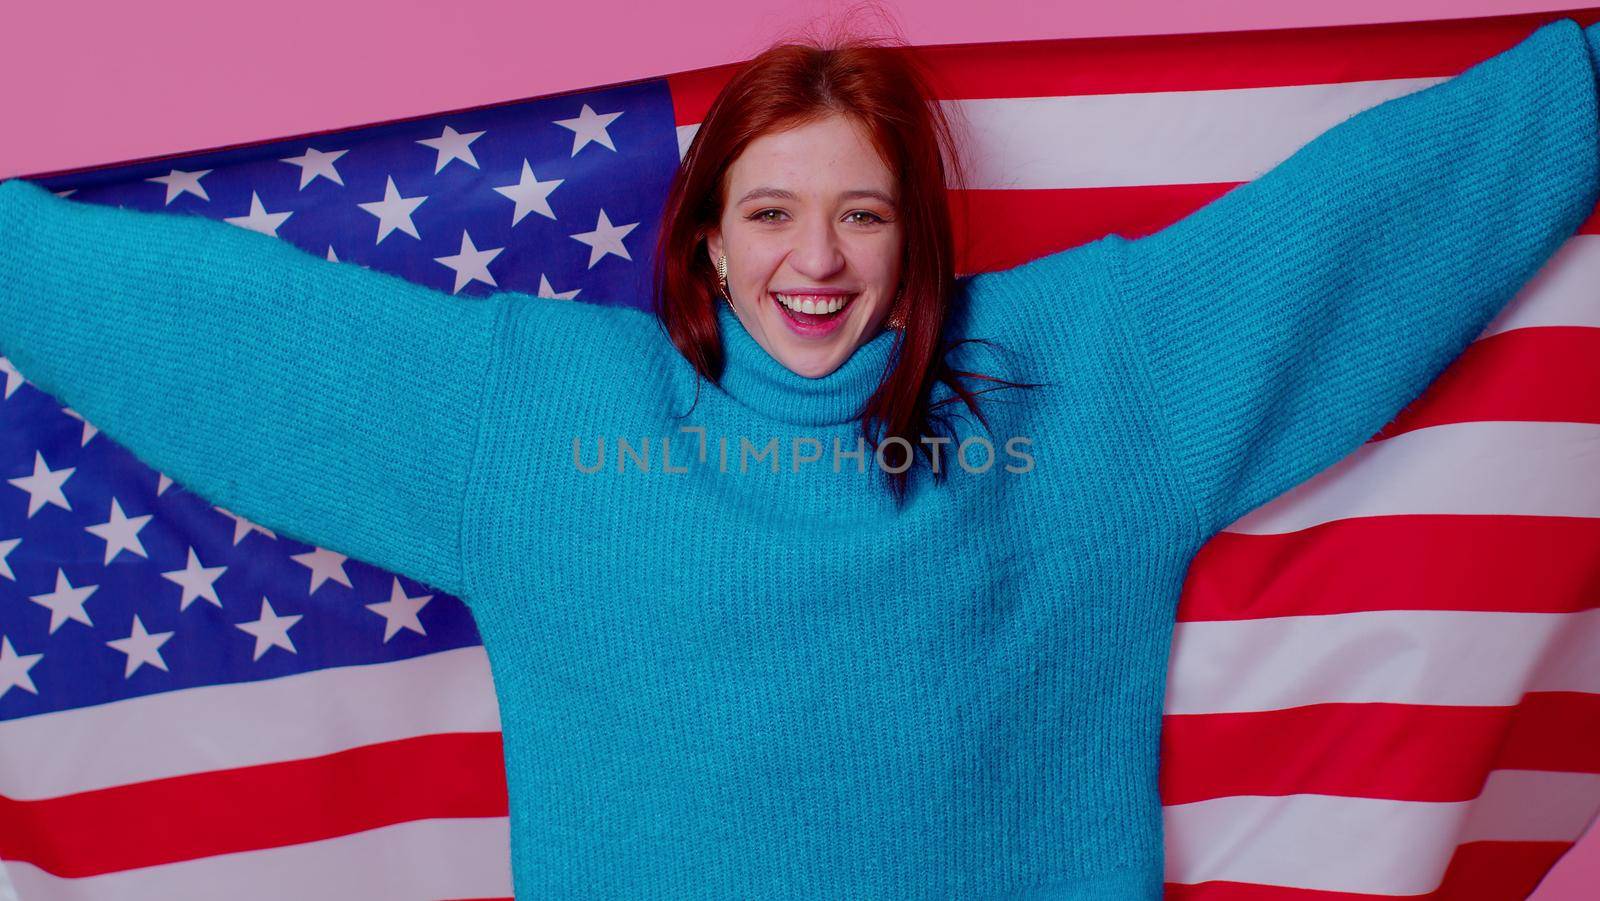 Trendy cheerful positive teen girl waving and wrapping in American USA flag, celebrating, human rights and freedoms. Independence day. Young pretty adult woman. Indoor studio shot on pink background